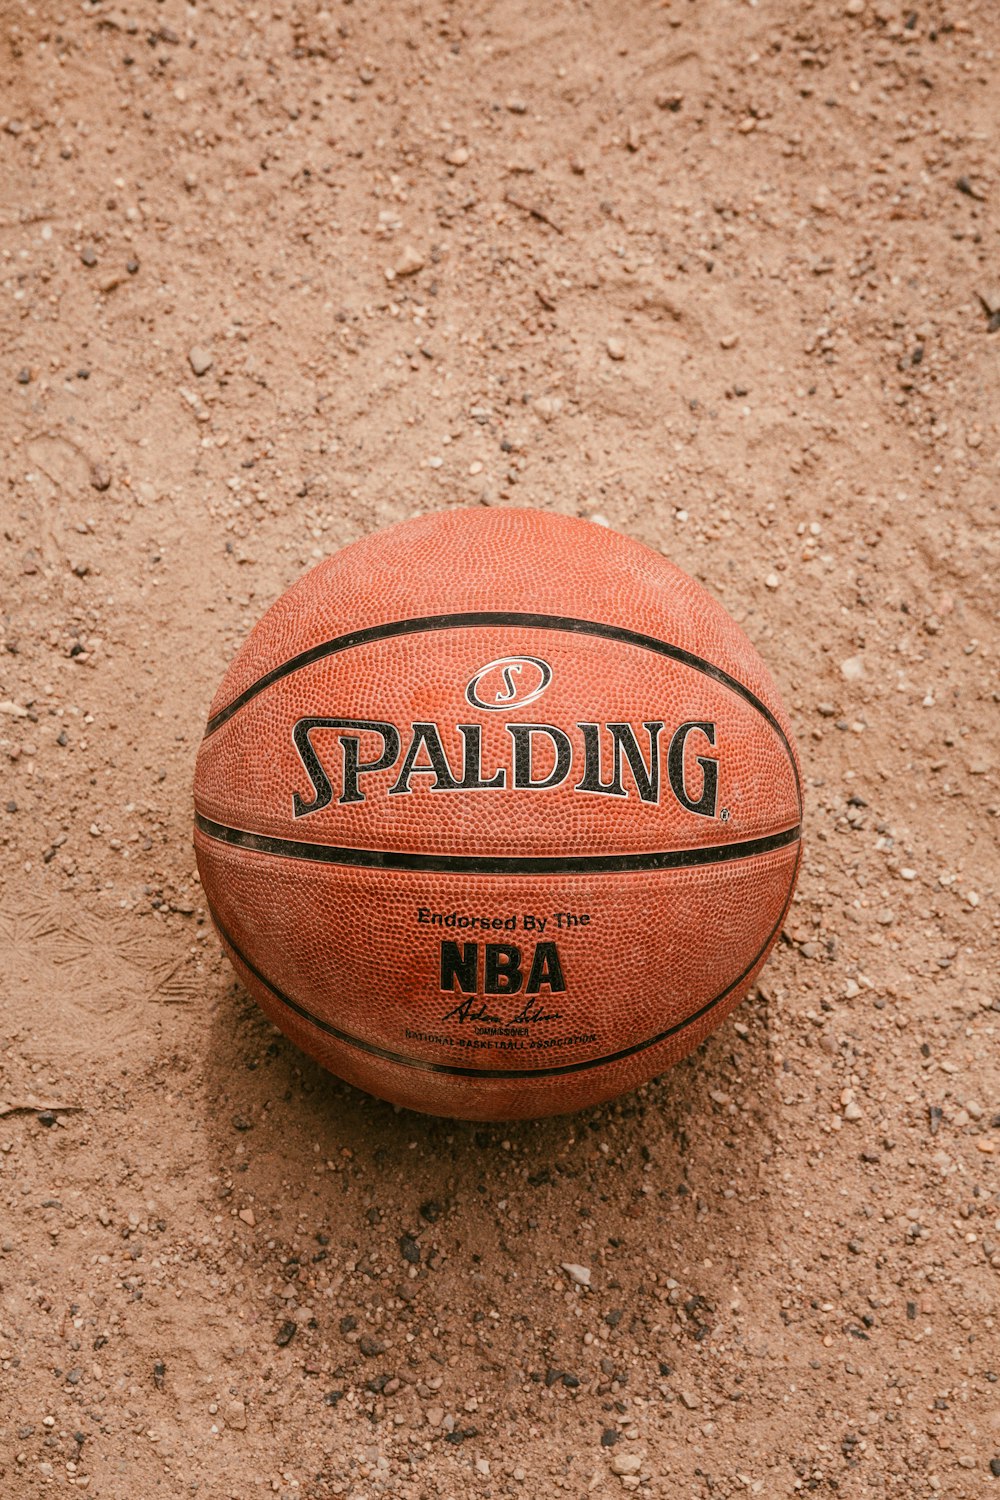 Basketball Ball Pictures | Download Free Images on Unsplash